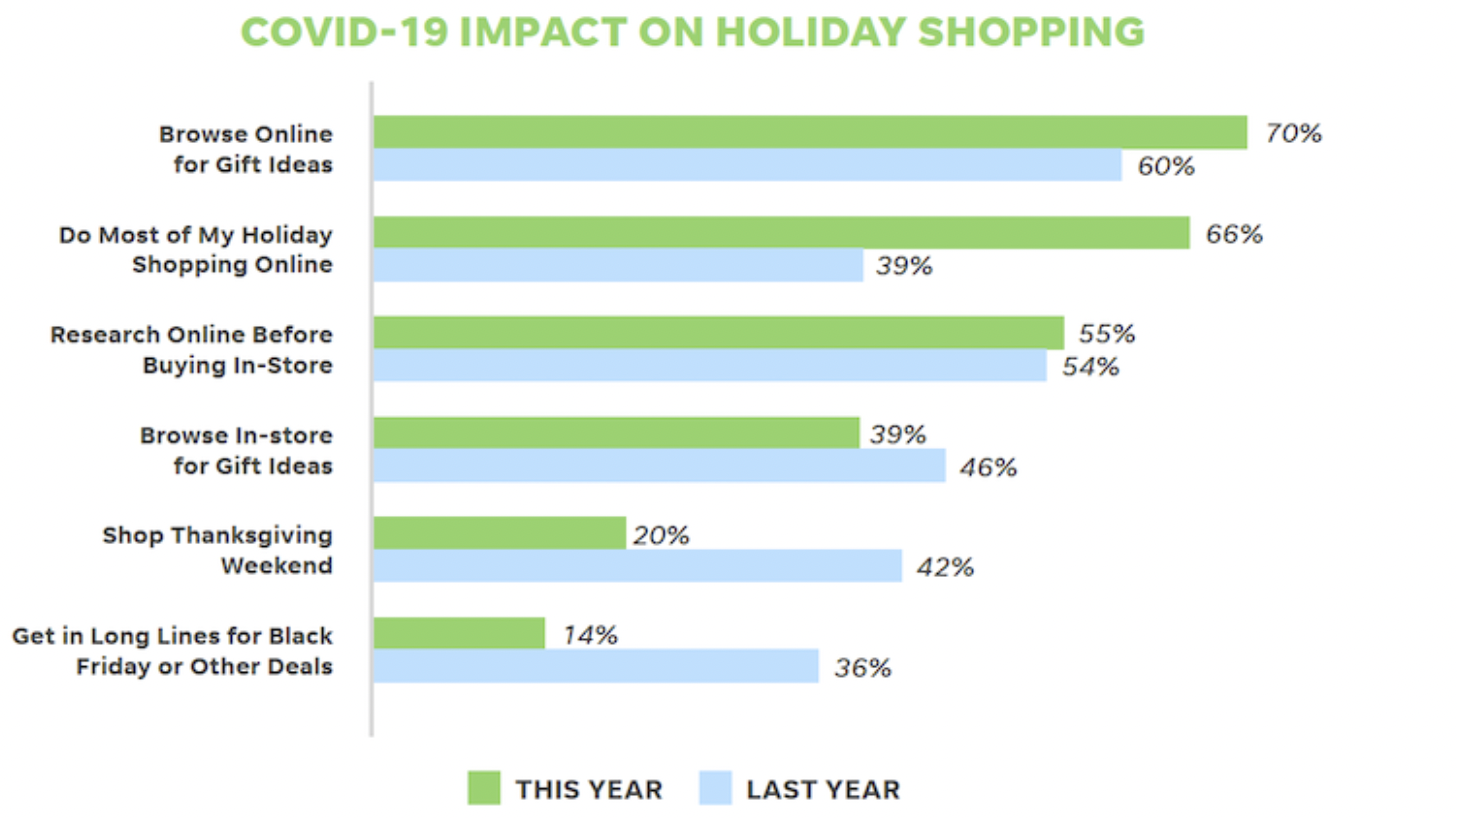 The impact of Covid-19 on holiday shopping in 2020 compared to 2019.